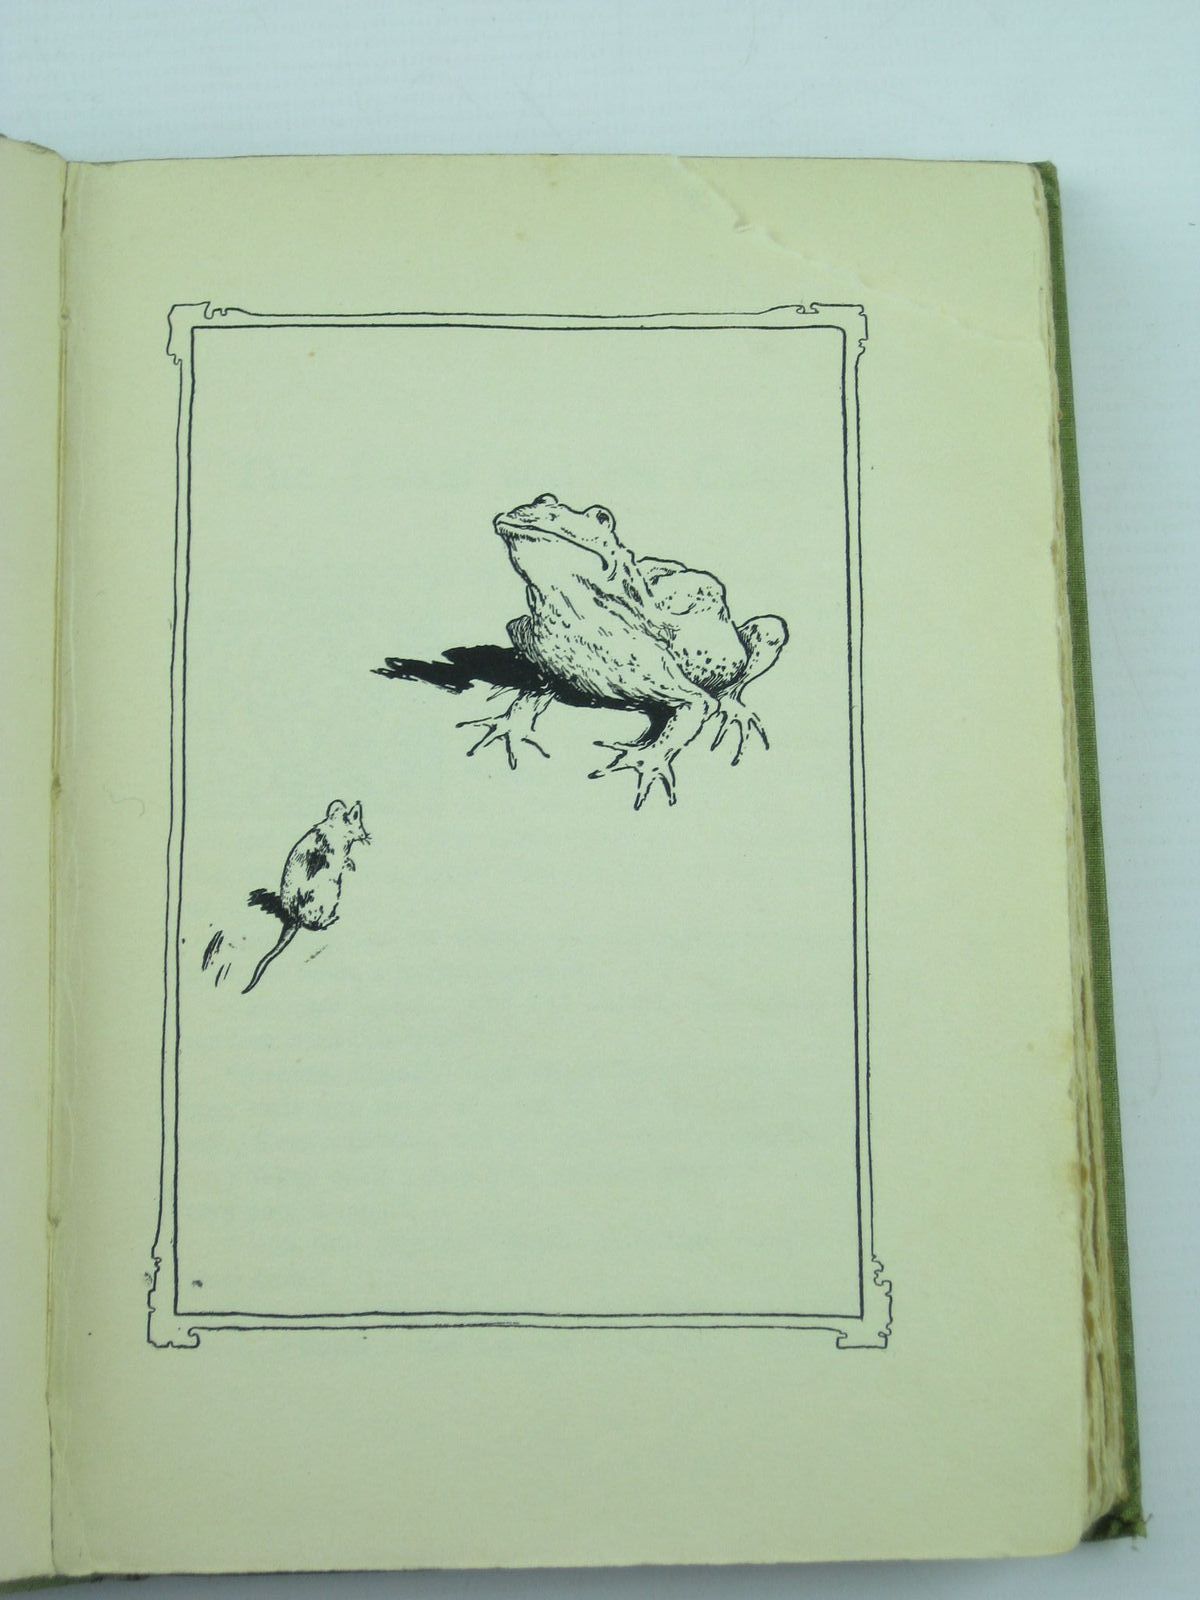 Photo of THE TALKING THRUSH AND OTHER TALES FROM INDIA written by Rouse, W.H.D.
Crooke, W. illustrated by Robinson, W. Heath published by J.M. Dent & Co. (STOCK CODE: 1310971)  for sale by Stella & Rose's Books